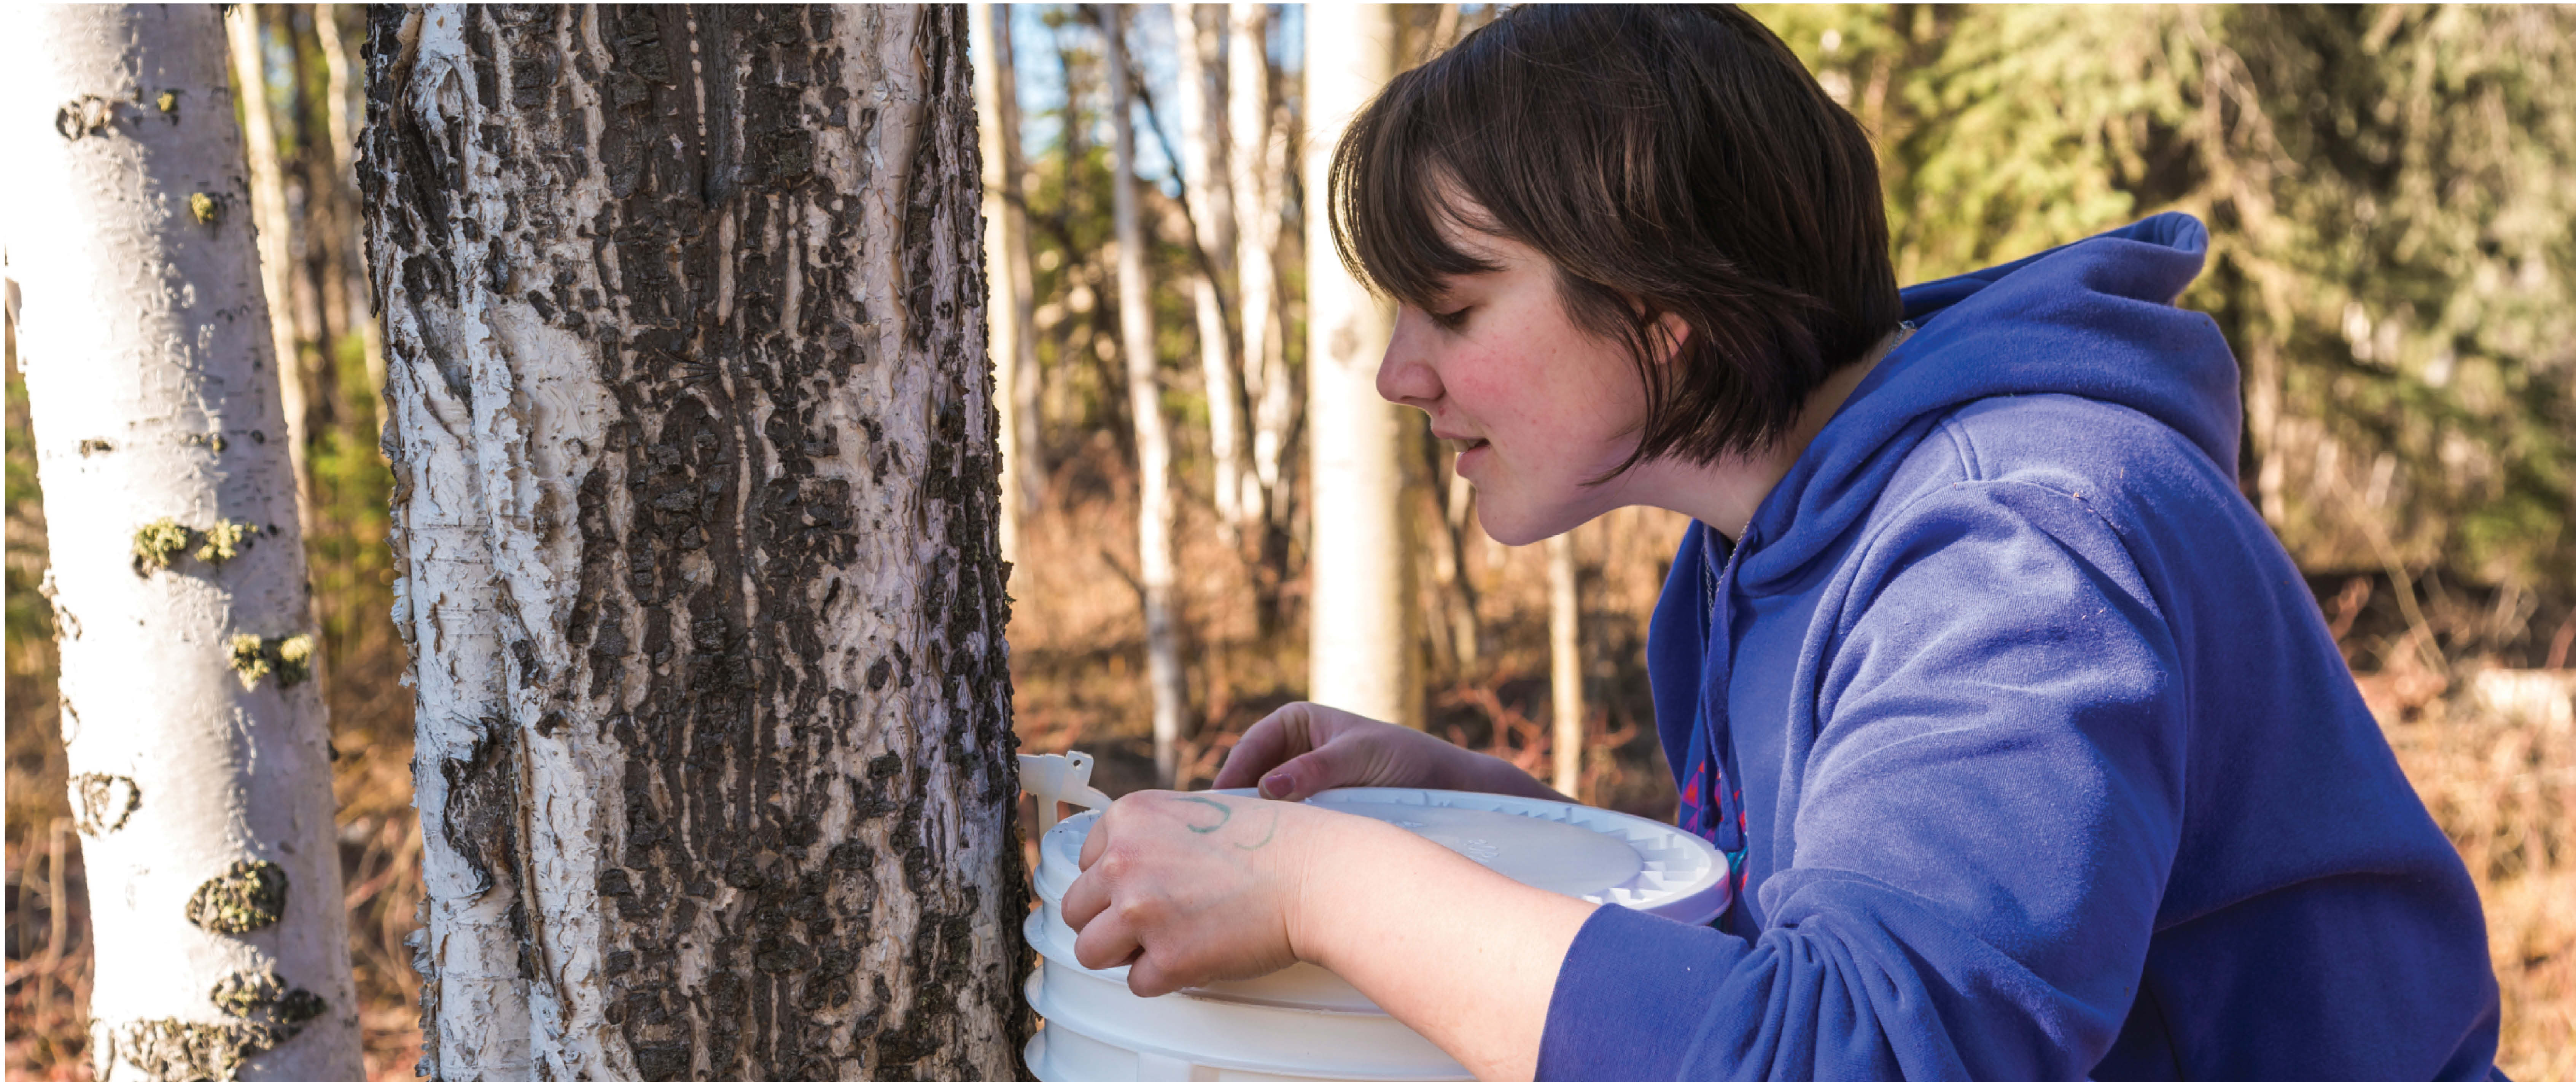 Student tapping tree sap